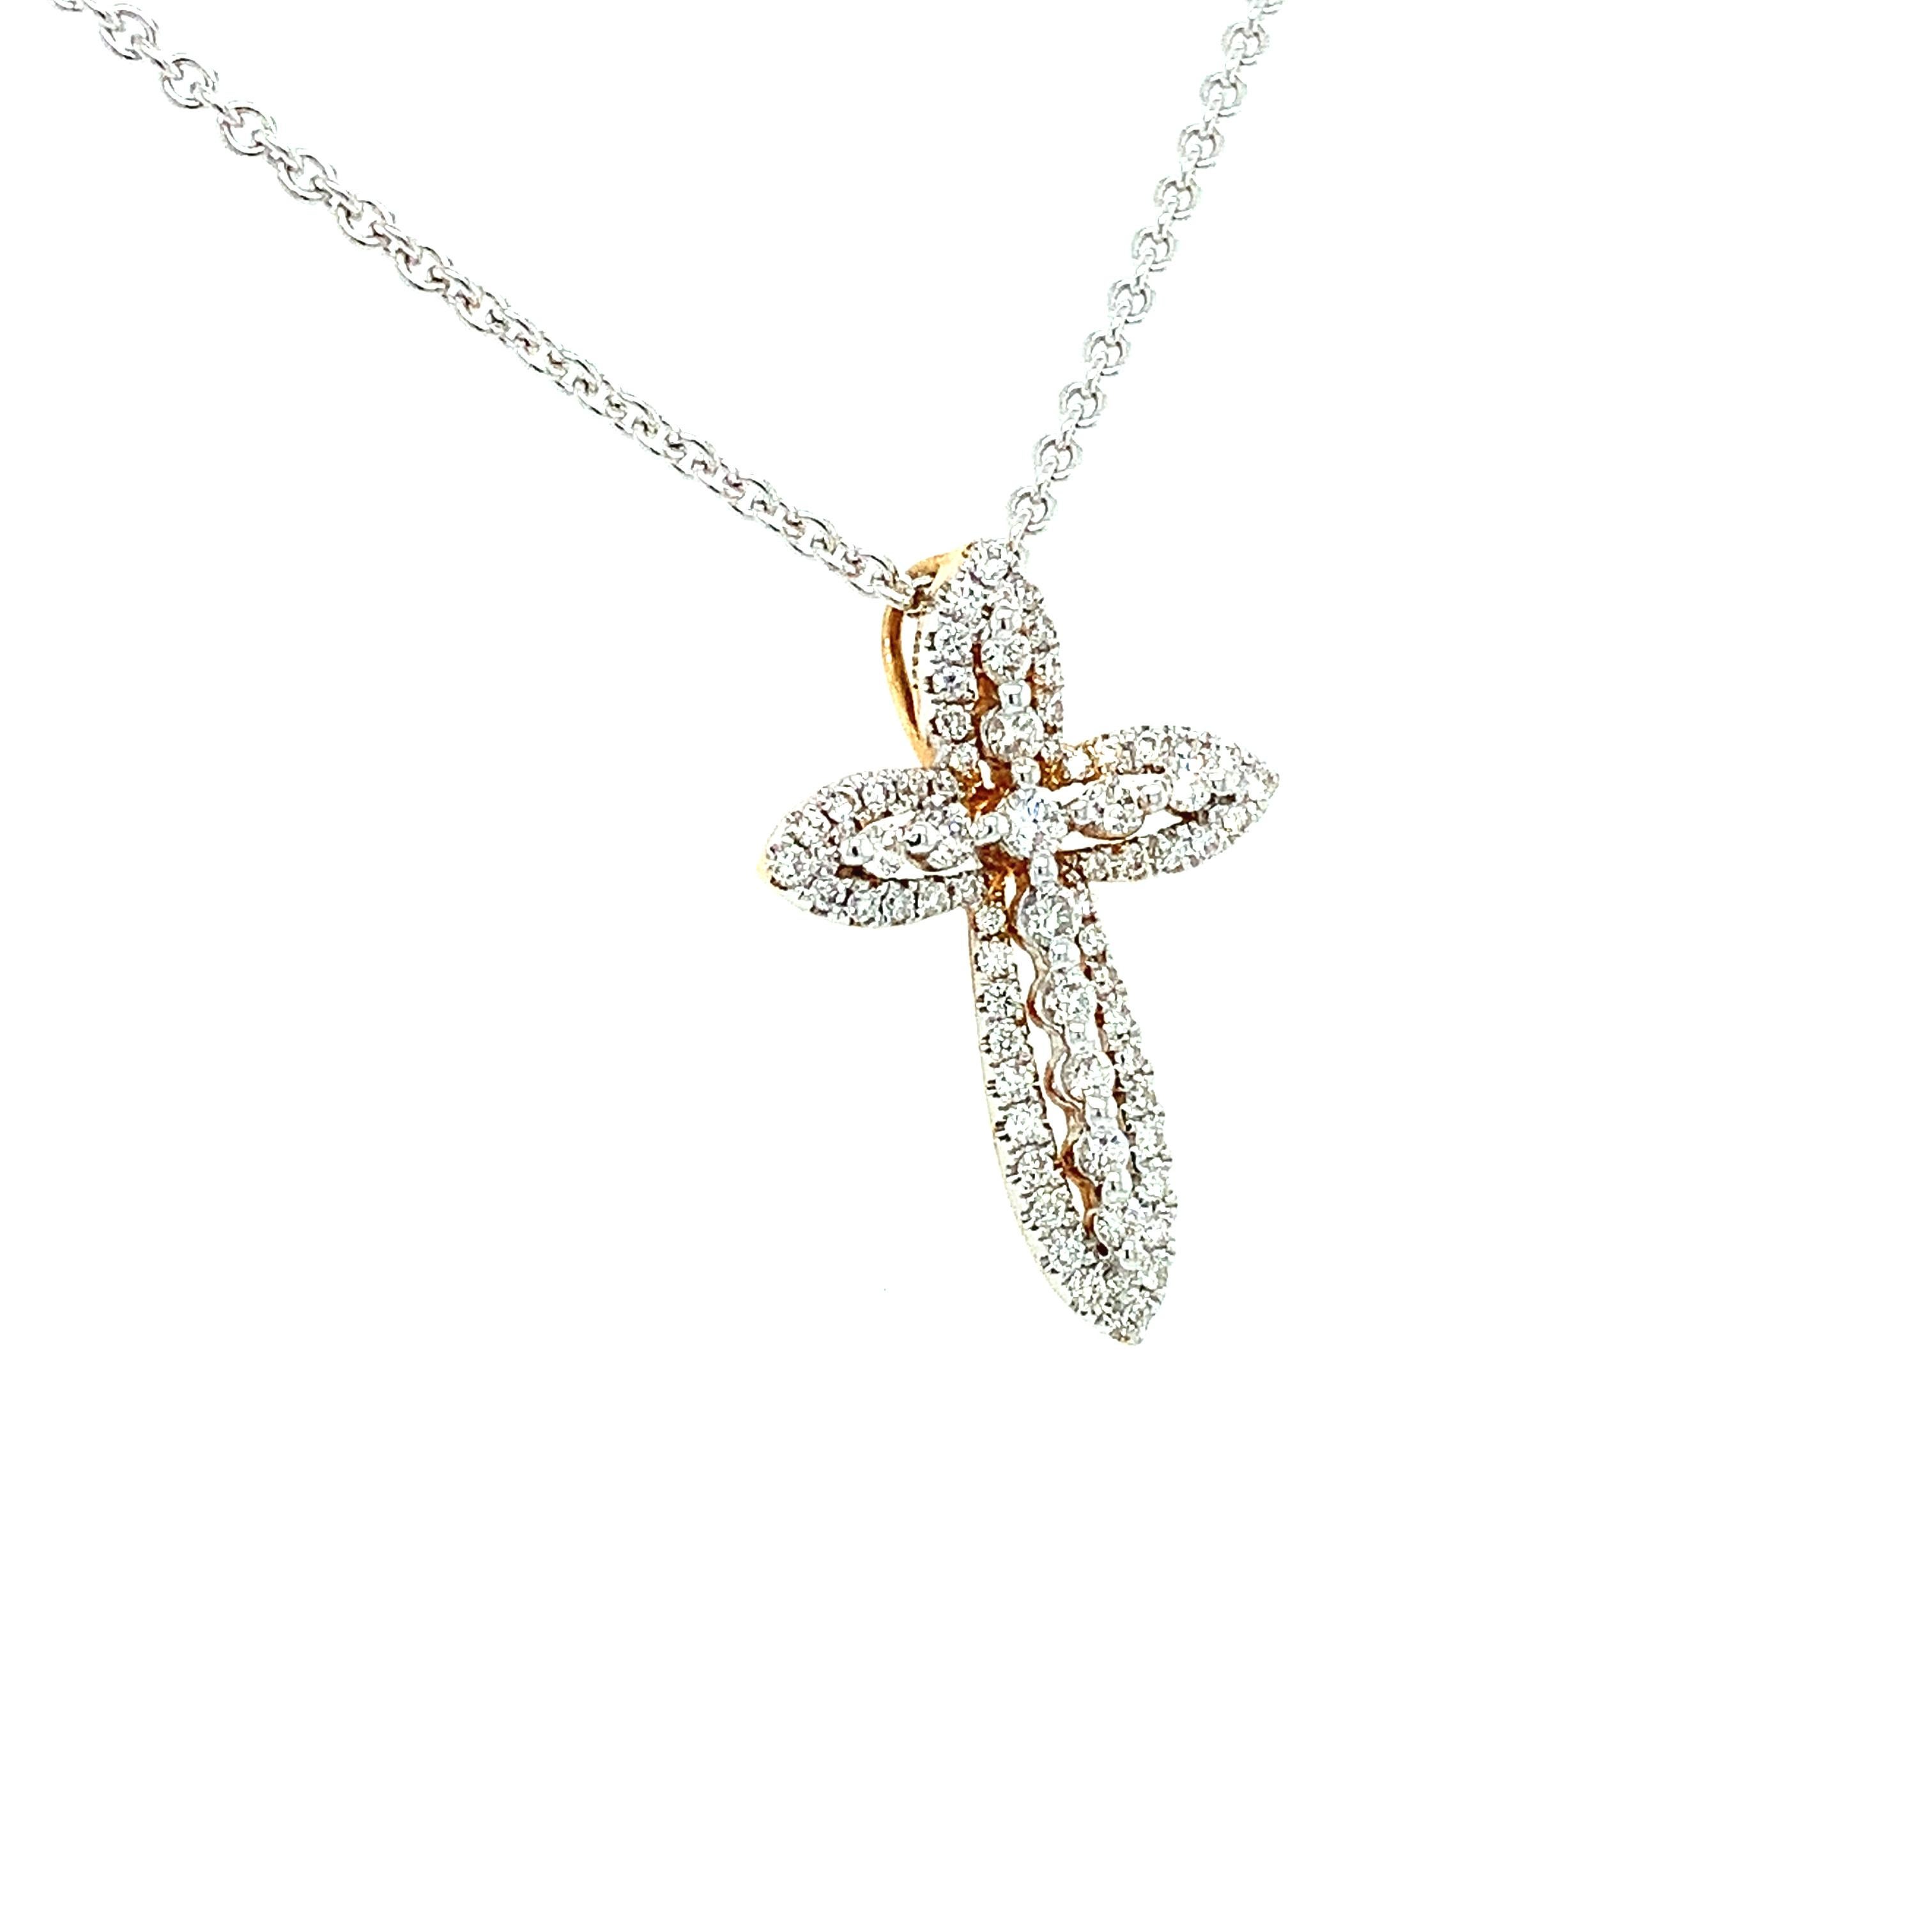 Round diamond cross pendant necklace in 18k white gold.
Round brilliant diamond total weight 1.06ct G colour, VS1 clarity
Hallmarked.
Chain length 18 inches
Cross measurements approximately 23x17mm
Valuation included.
